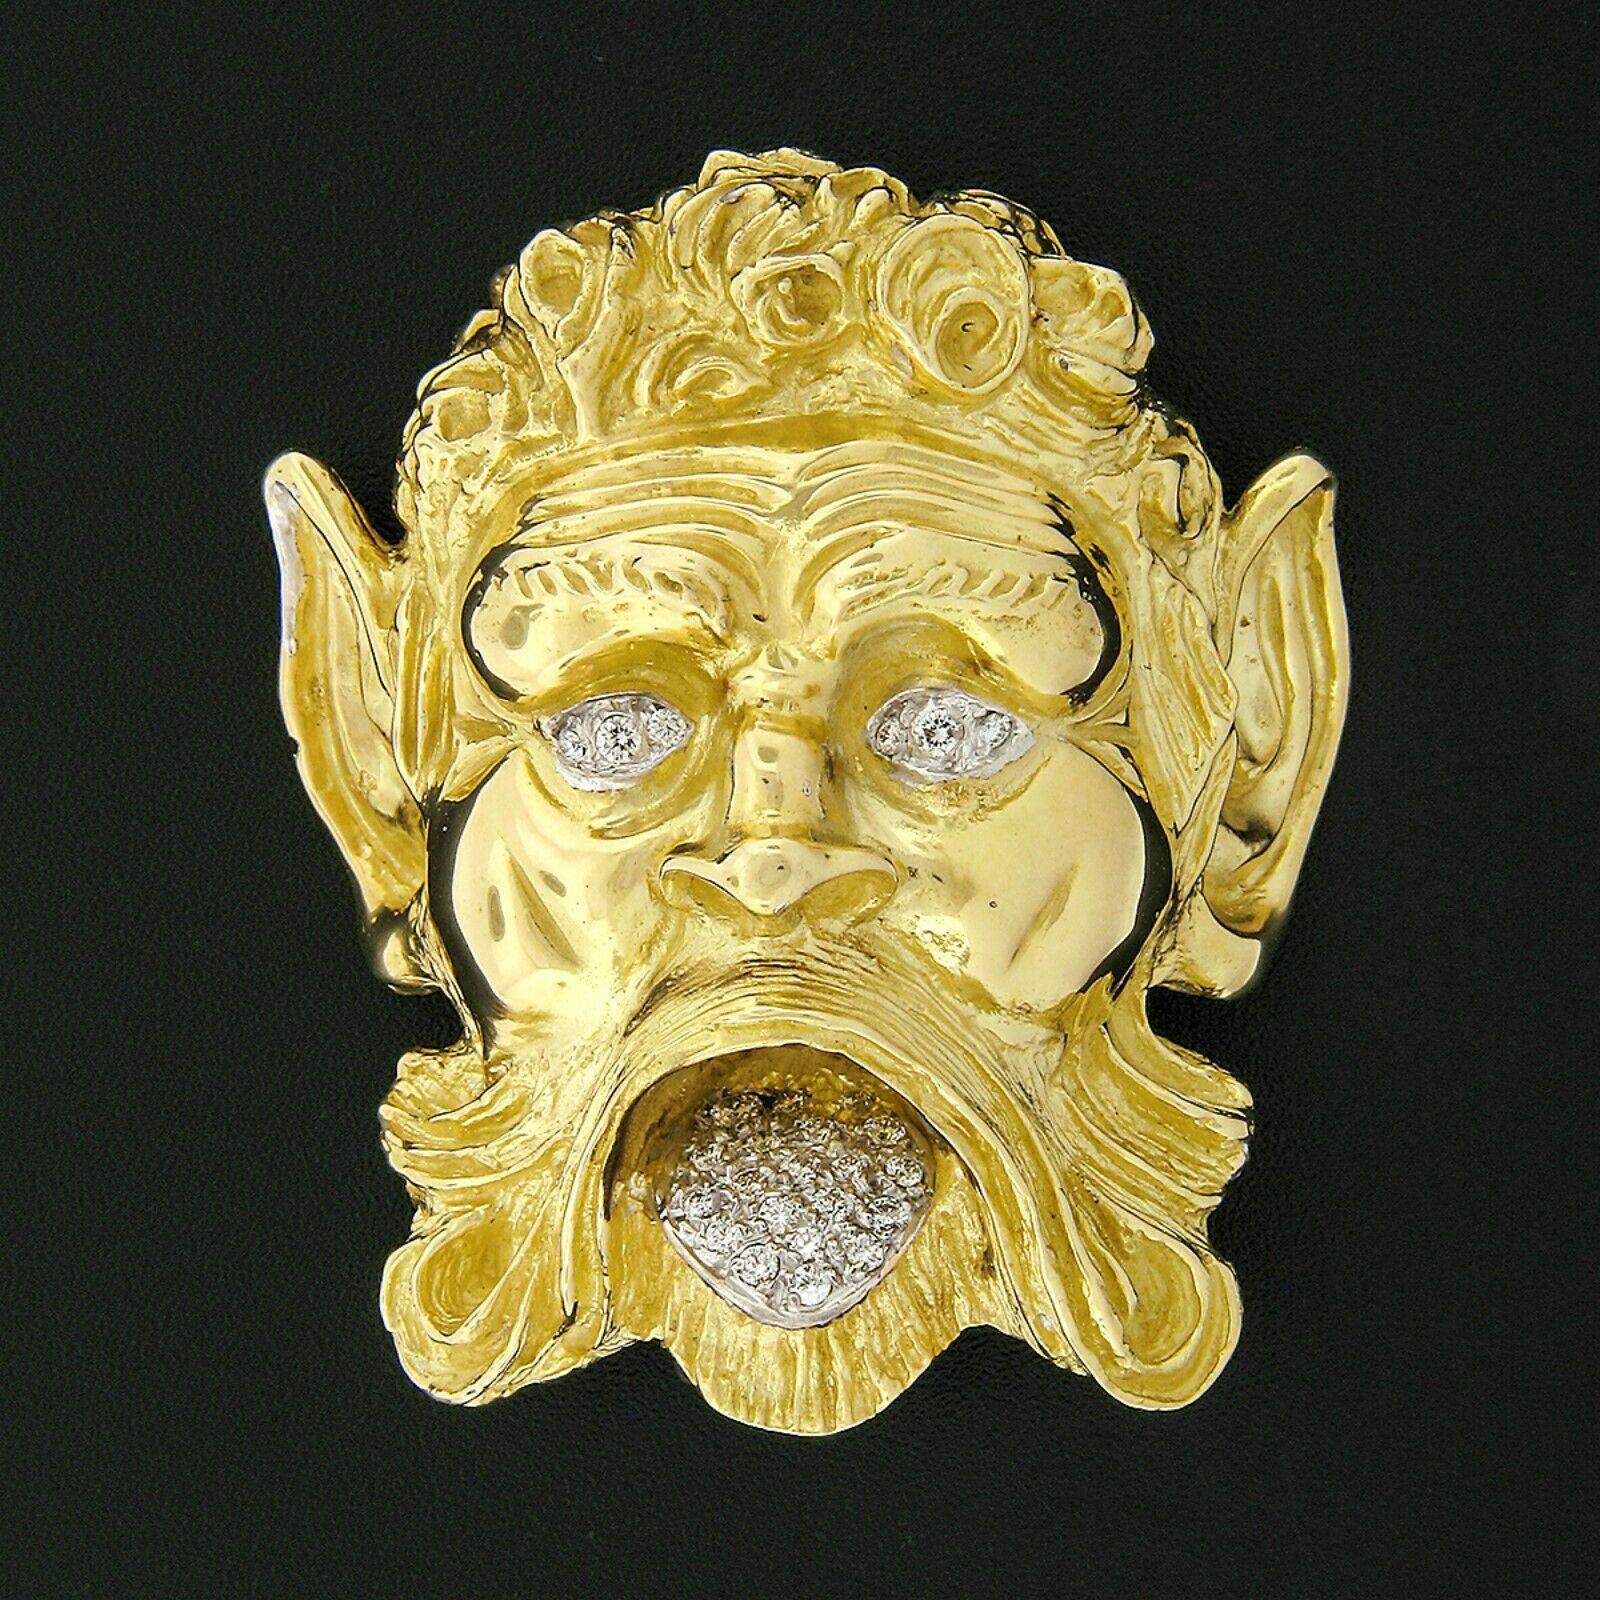 Here we have a very bold and large vintage brooch/pendant designed by Henry Dunay and solidly crafted in 18k yellow gold. The large brooch features a very well detailed Poseidon's head design from Greek Mythology, adorned with super fine quality